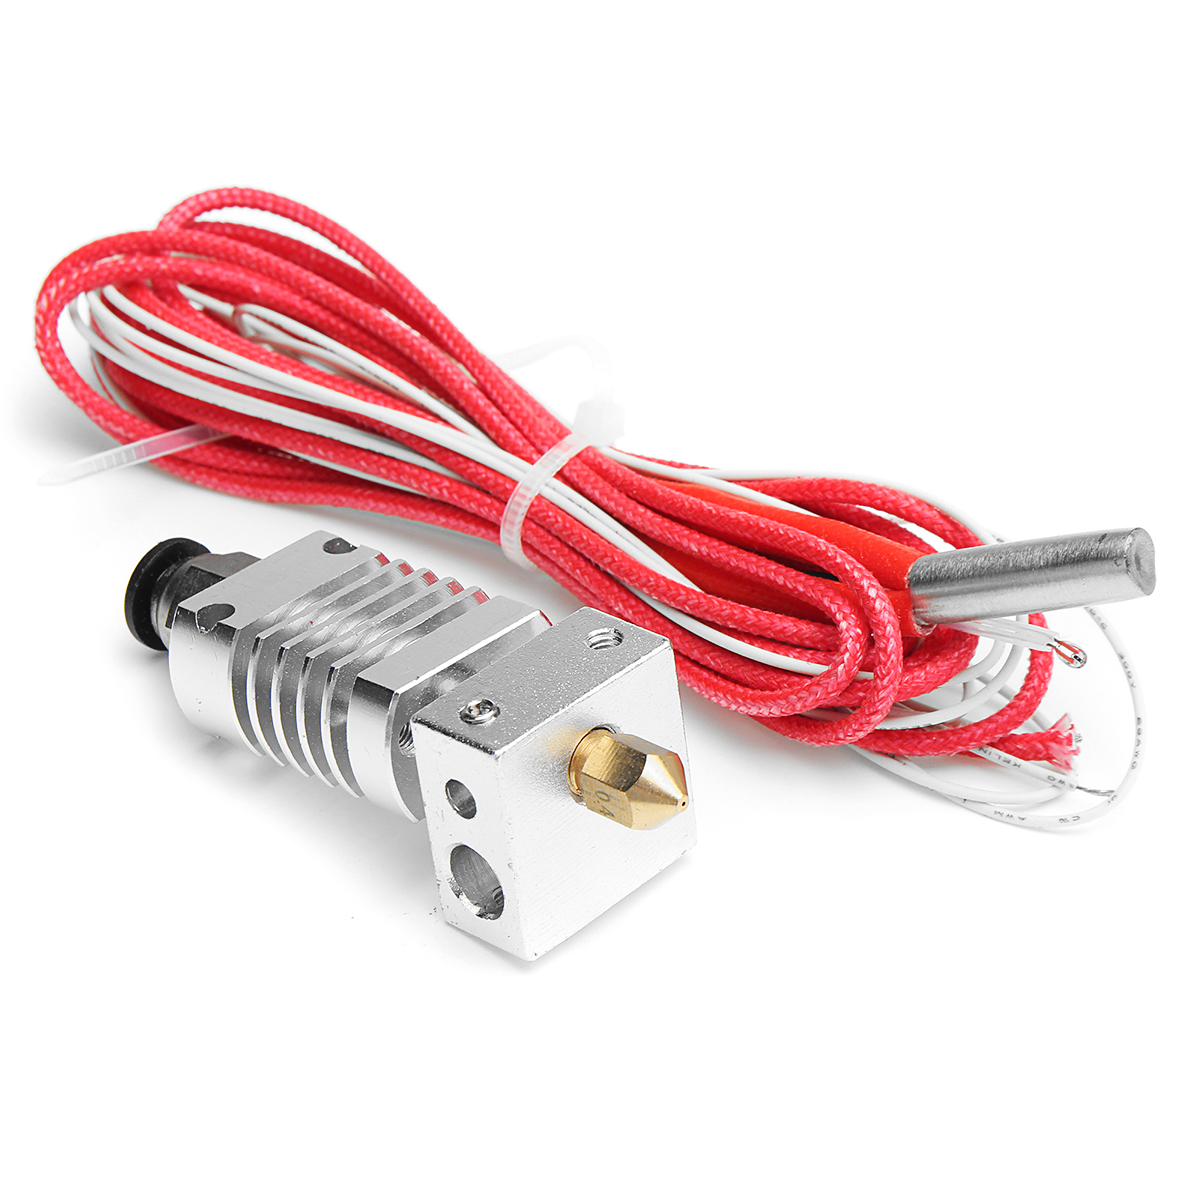 

V6 1.75mm All Metal J-Head Hotend Remote Extruder Kit with Heating tube for CR10 3D Printer